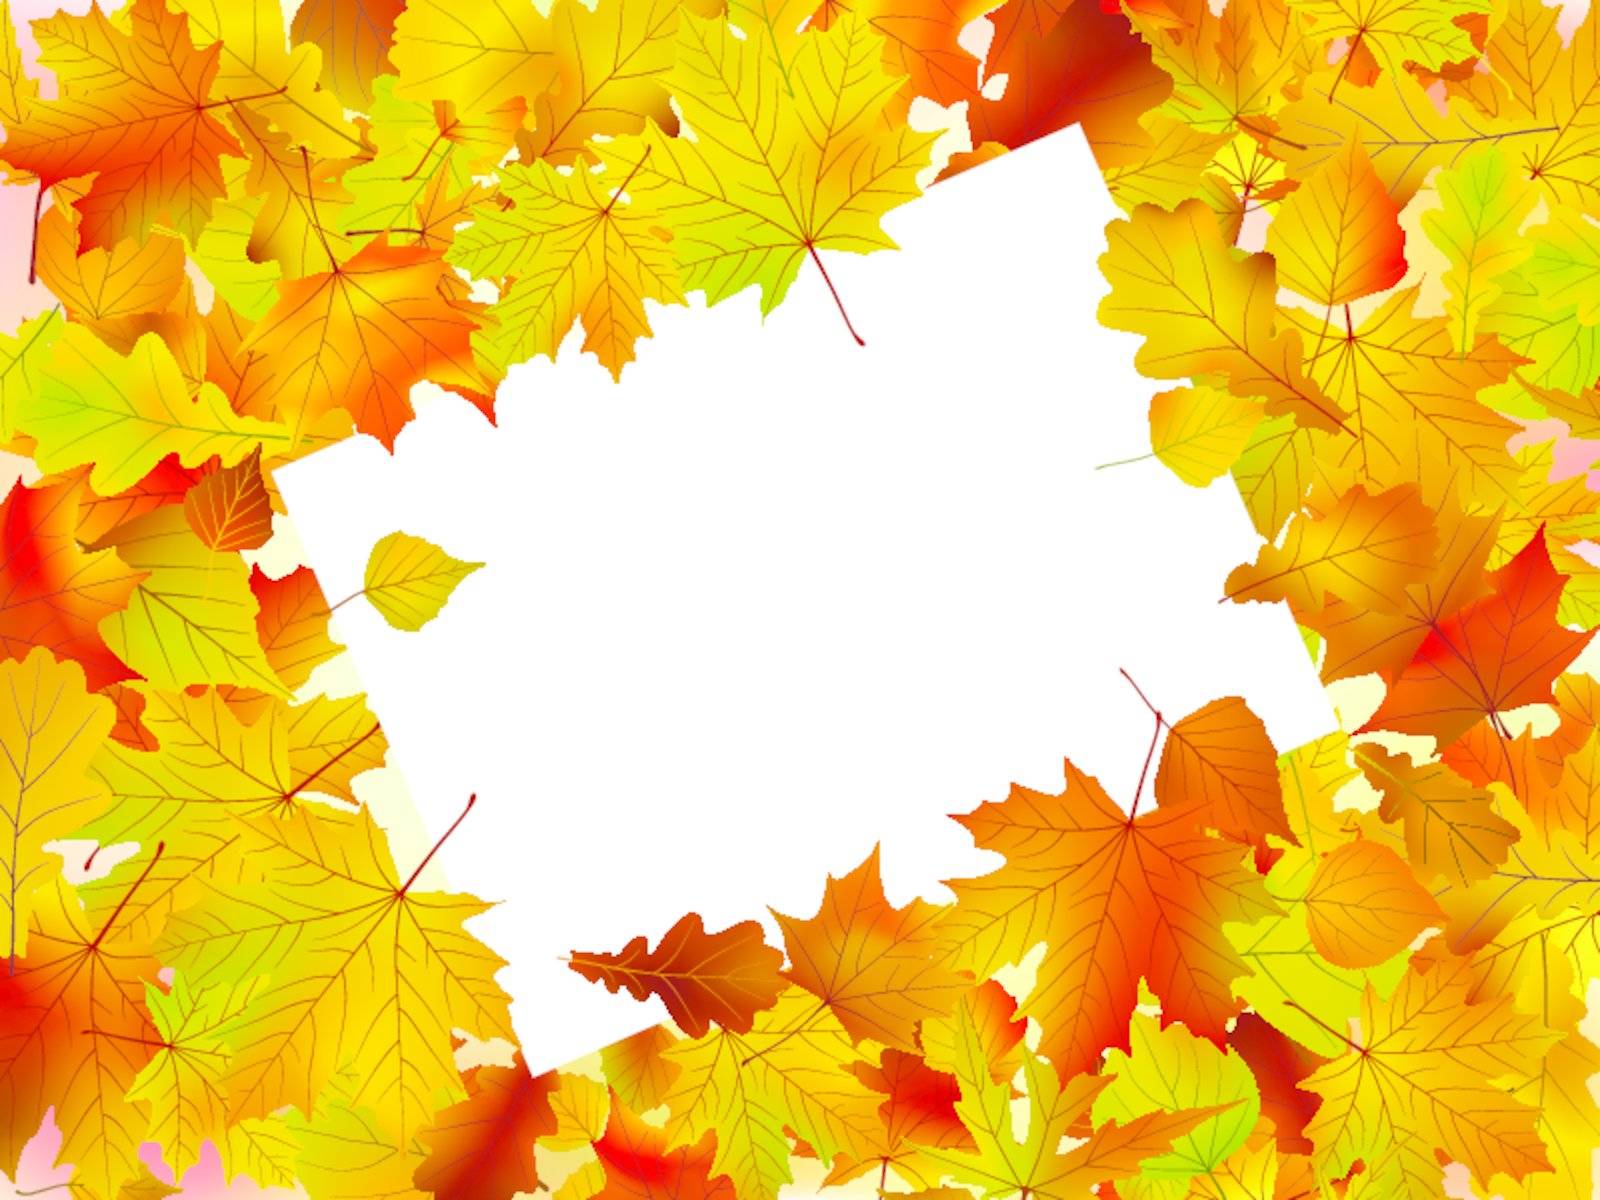 Autumn frame turned at an angle. EPS 8 vector file included